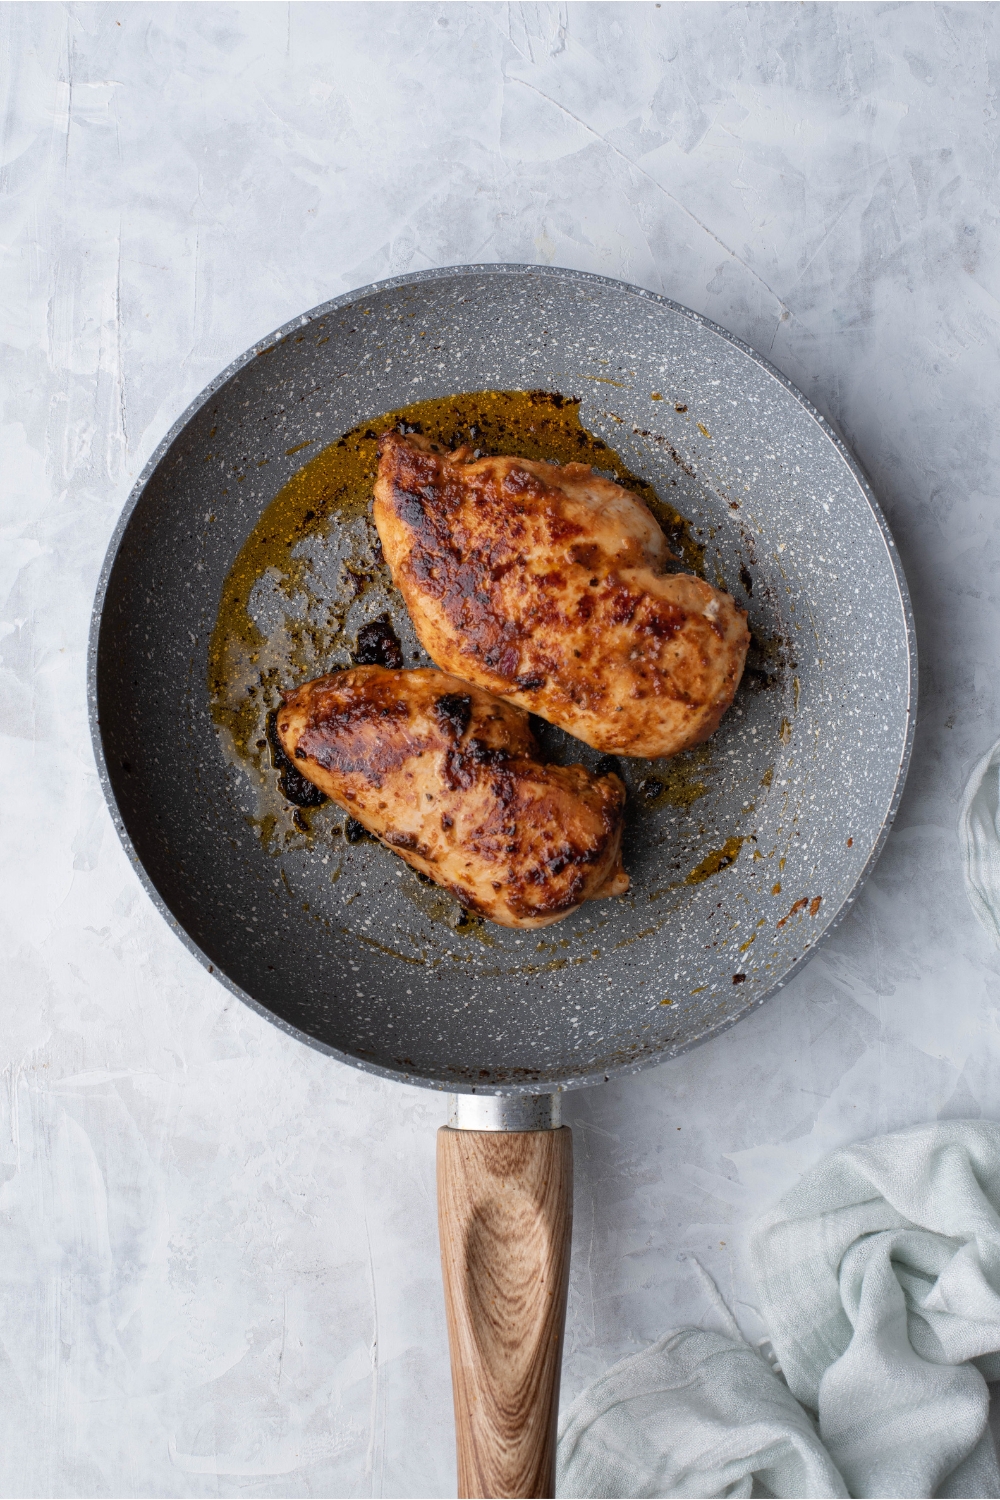 Chipotle chicken cooking in a skillet with oil.